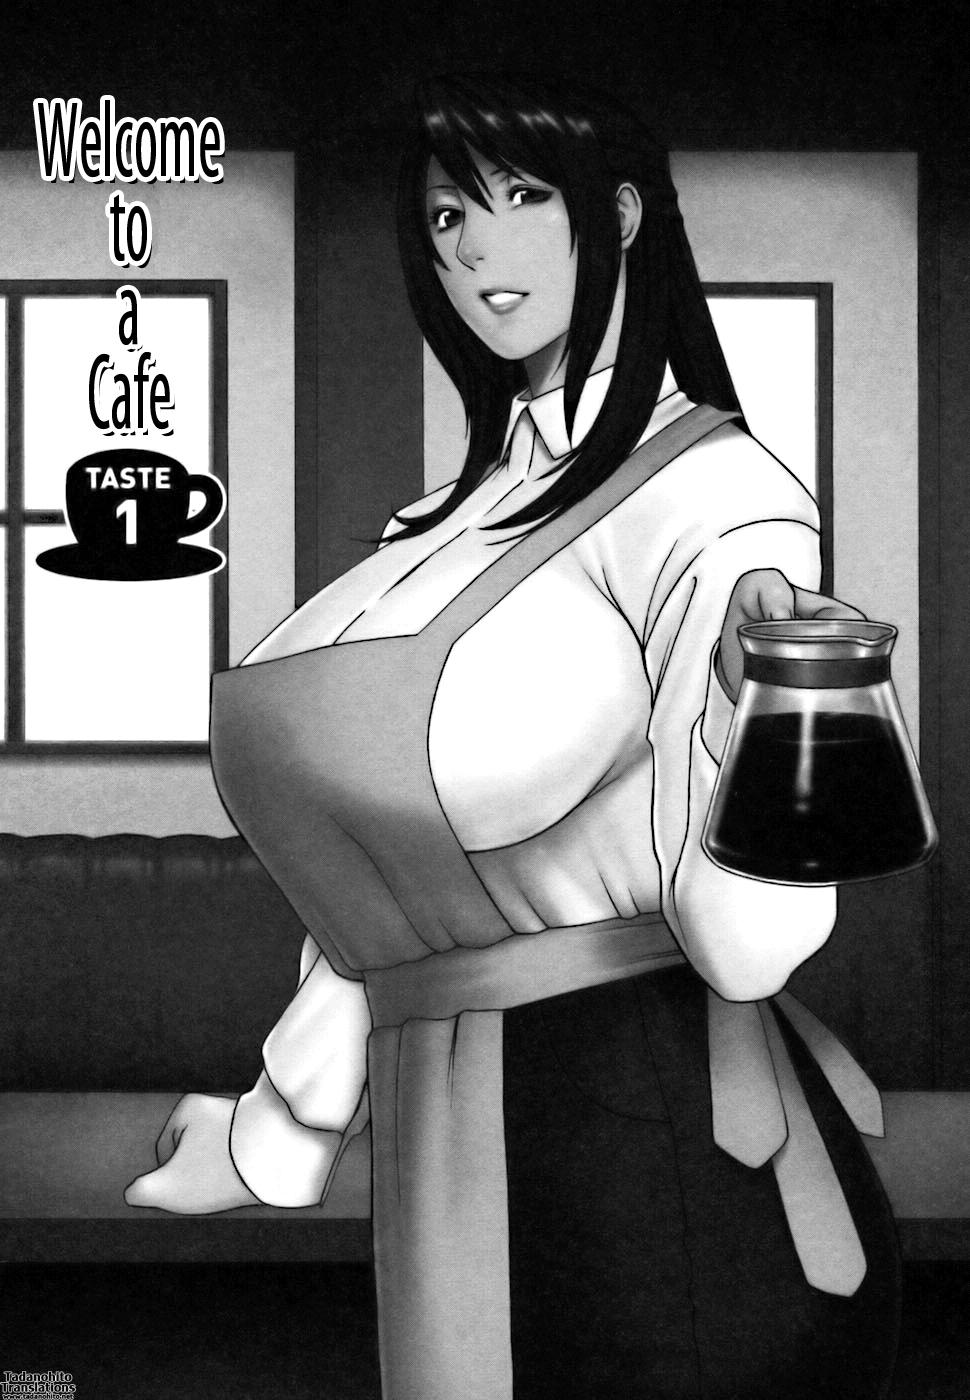 Cafe e Youkoso - Welcome To A Cafe 10